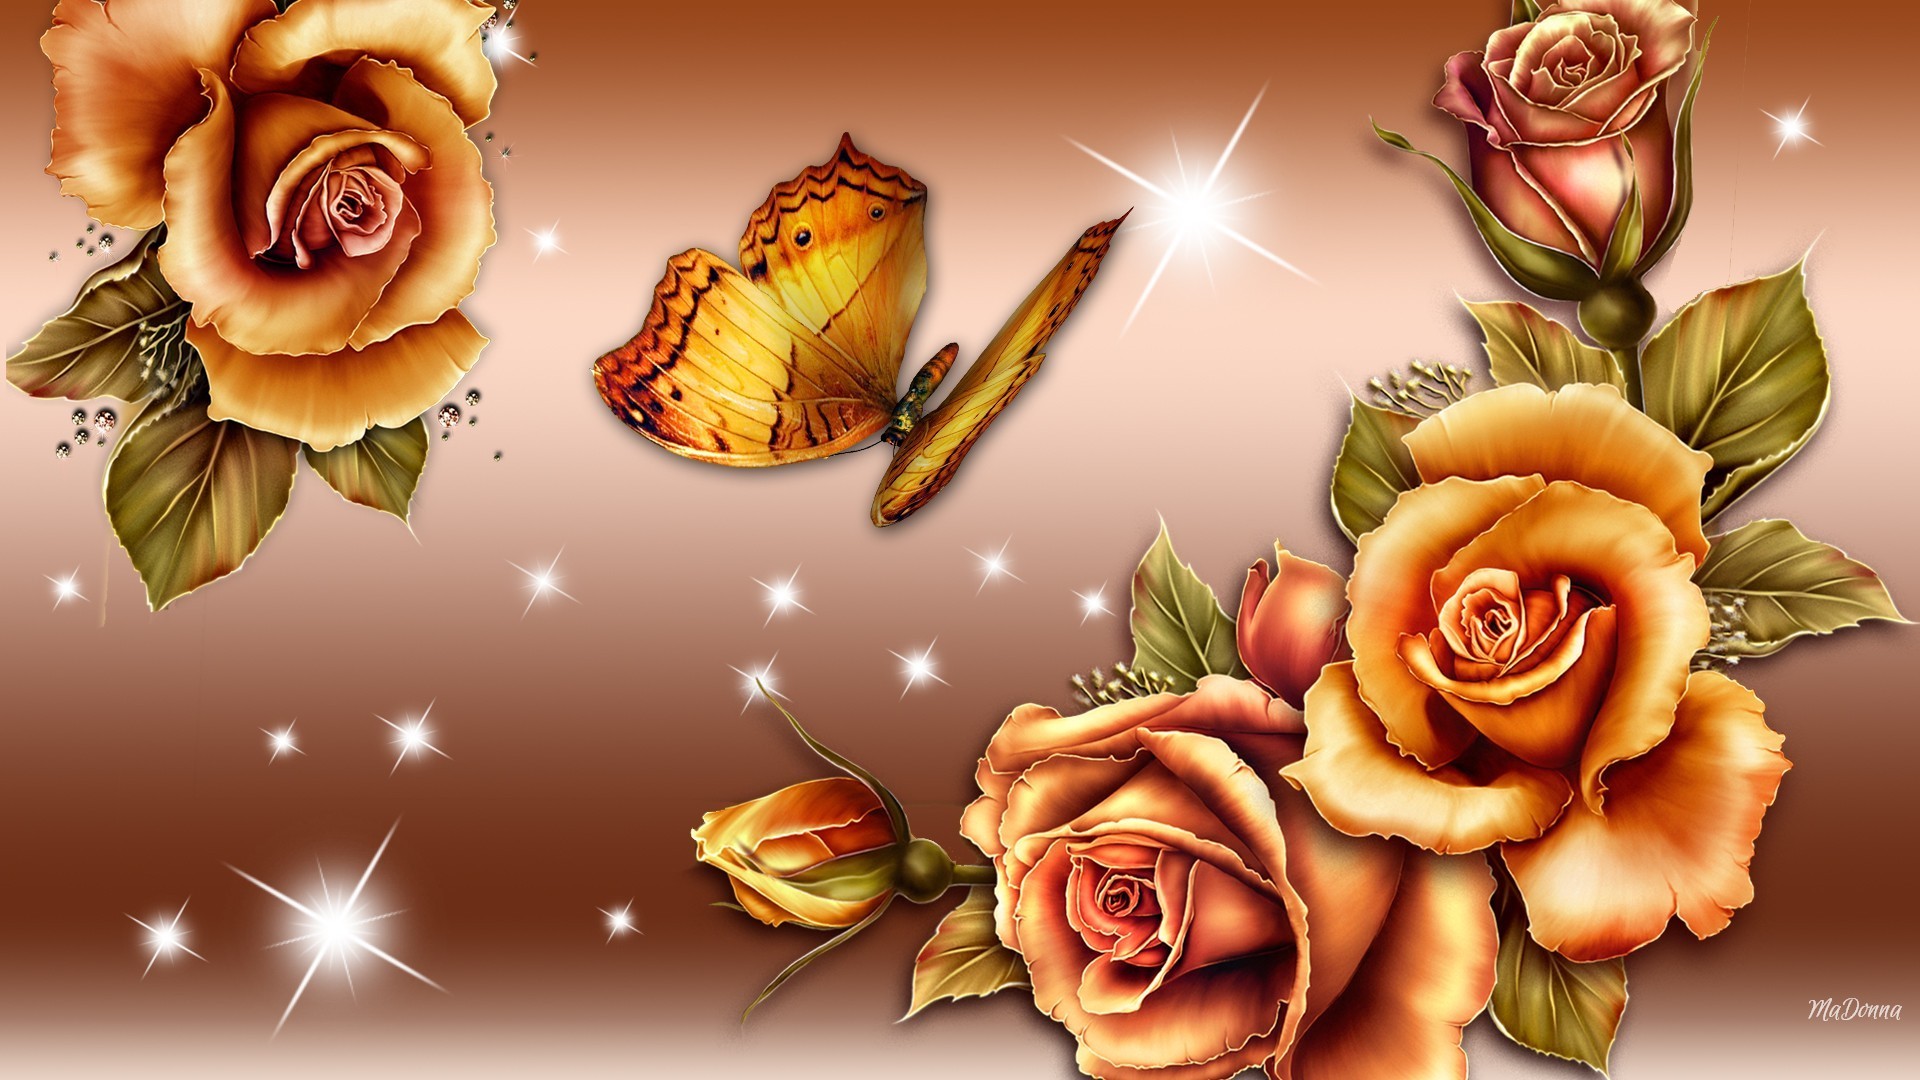 Gradient Tag – Butterfly Gold Shine Glow Roses Bronze Gradient Beautirful  Golden Lovely Nice Flower Hd